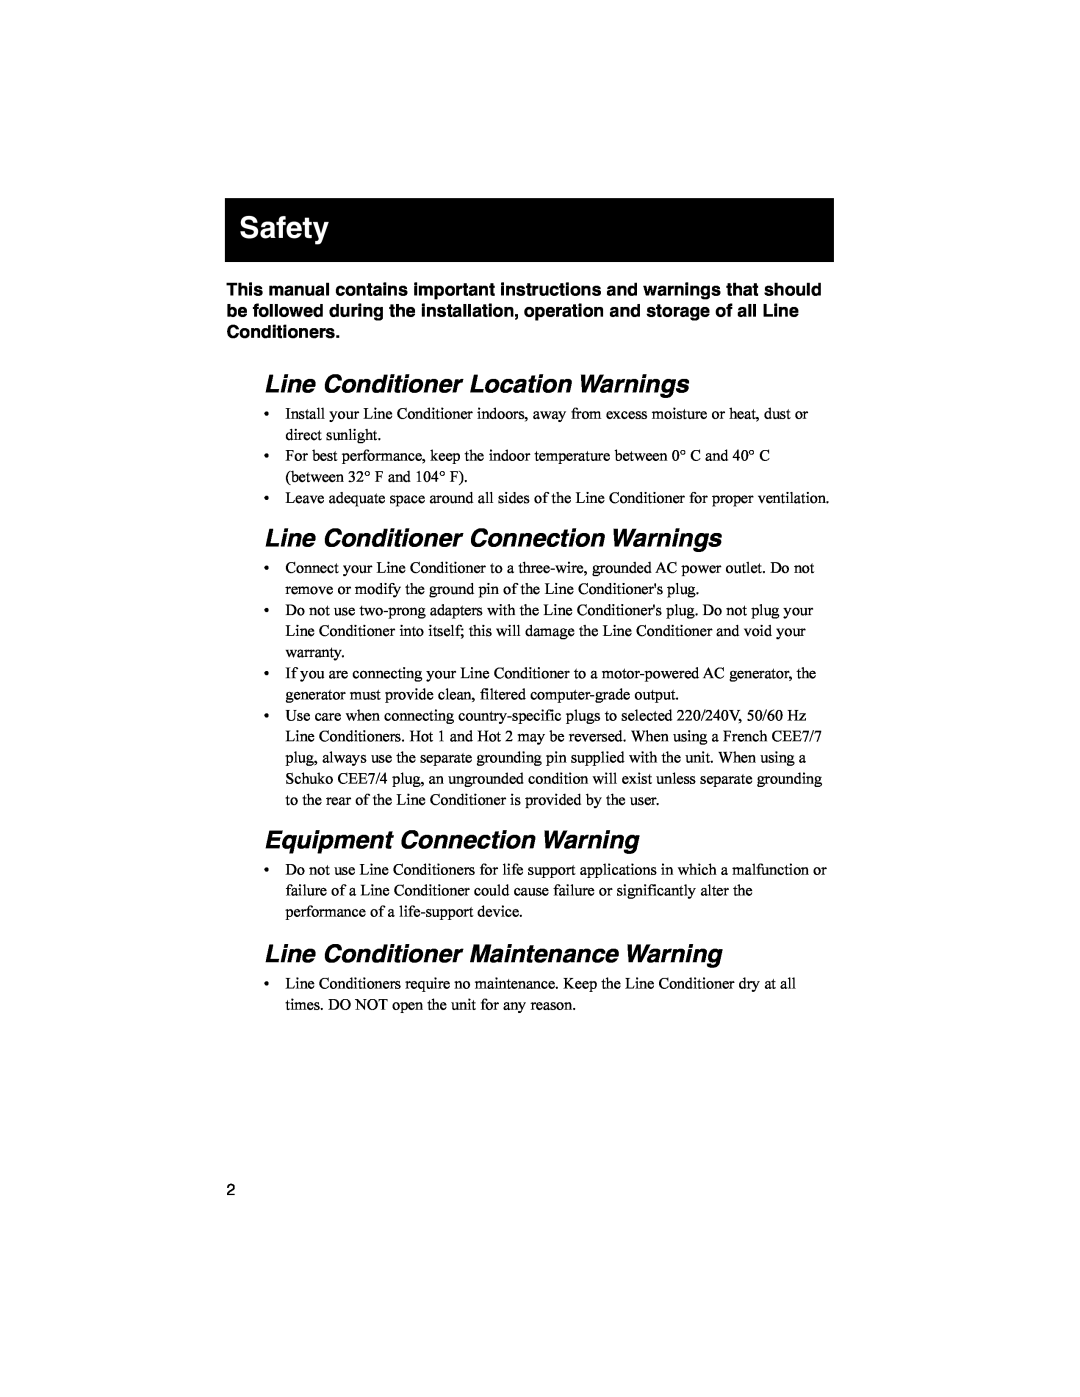 Tripp Lite 93-2268_EN owner manual Safety, Line Conditioner Location Warnings, Line Conditioner Connection Warnings 